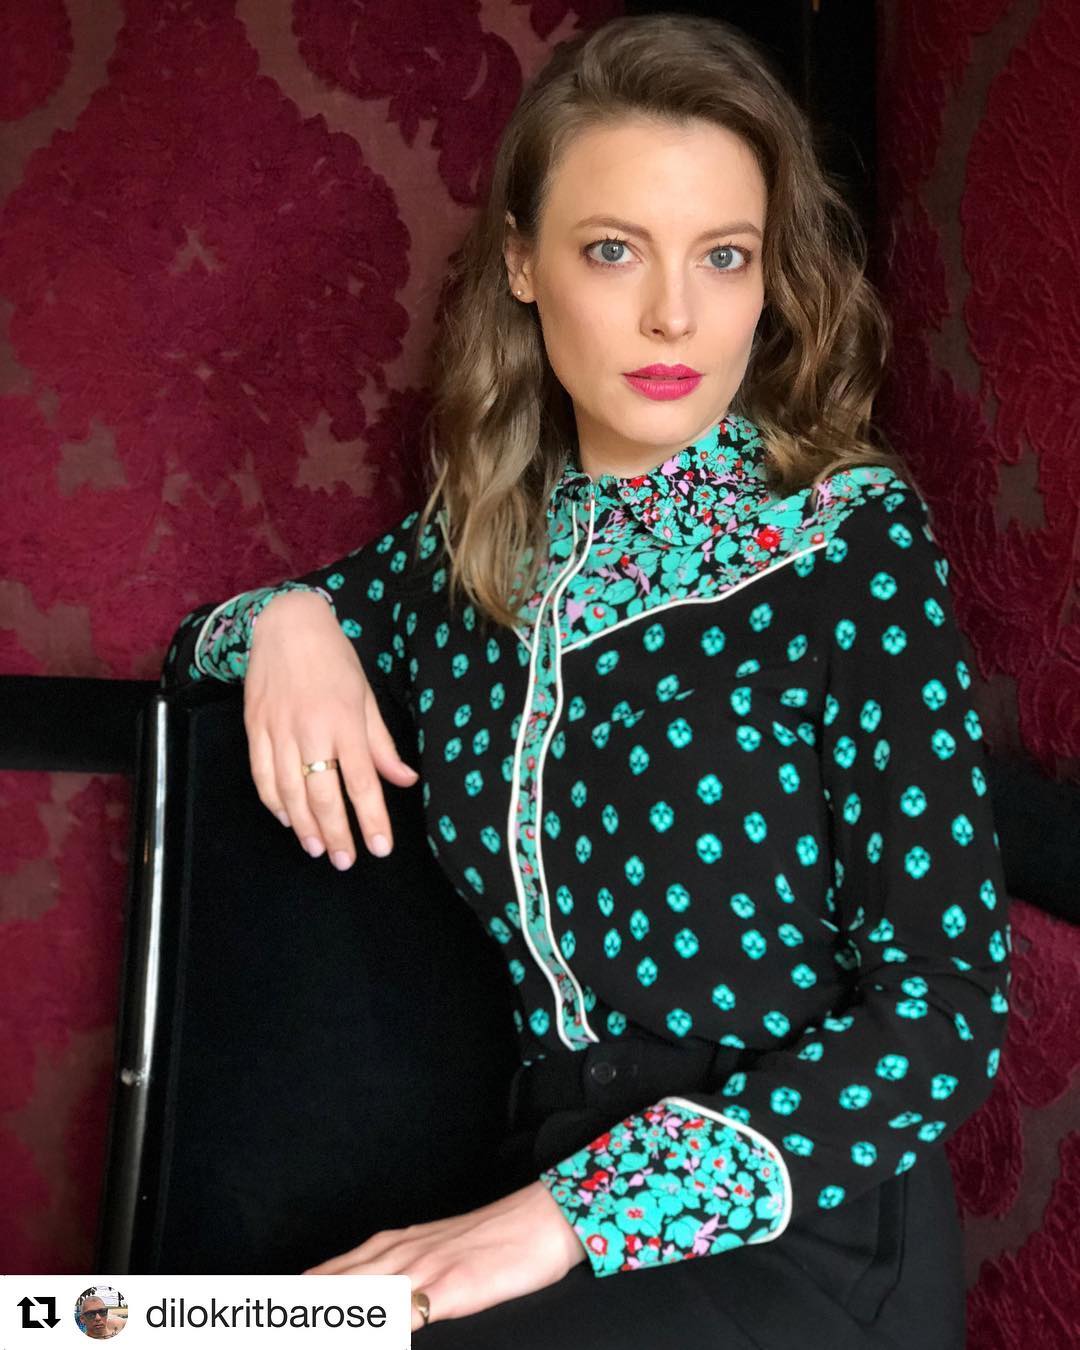 55+ Hot And Sexy Pictures Of Gillian Jacobs Will Drive You Nuts For Her | Best Of Comic Books